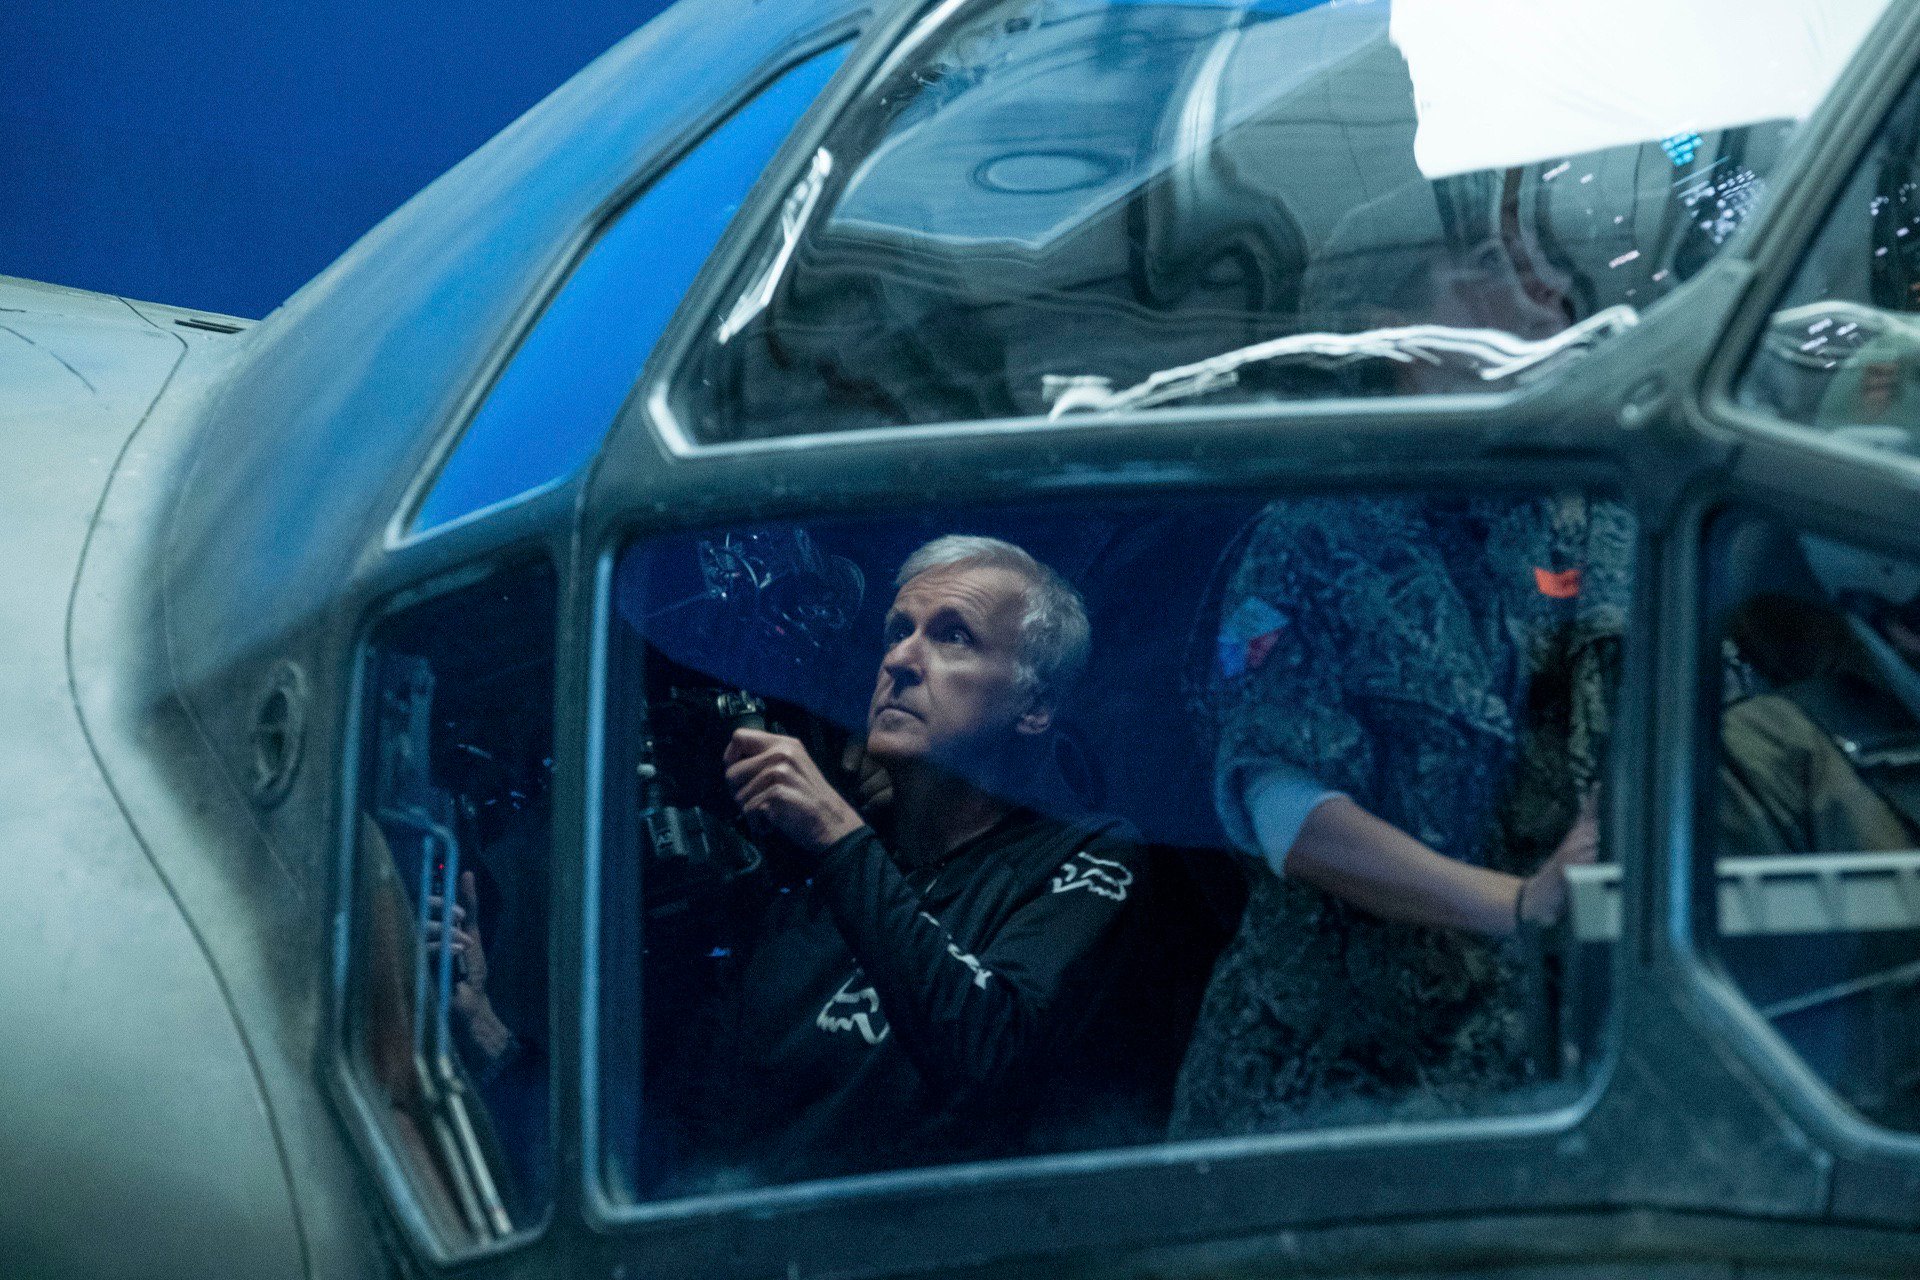 James Cameron on the filming of the underwater world in Avatar: The Way of Water